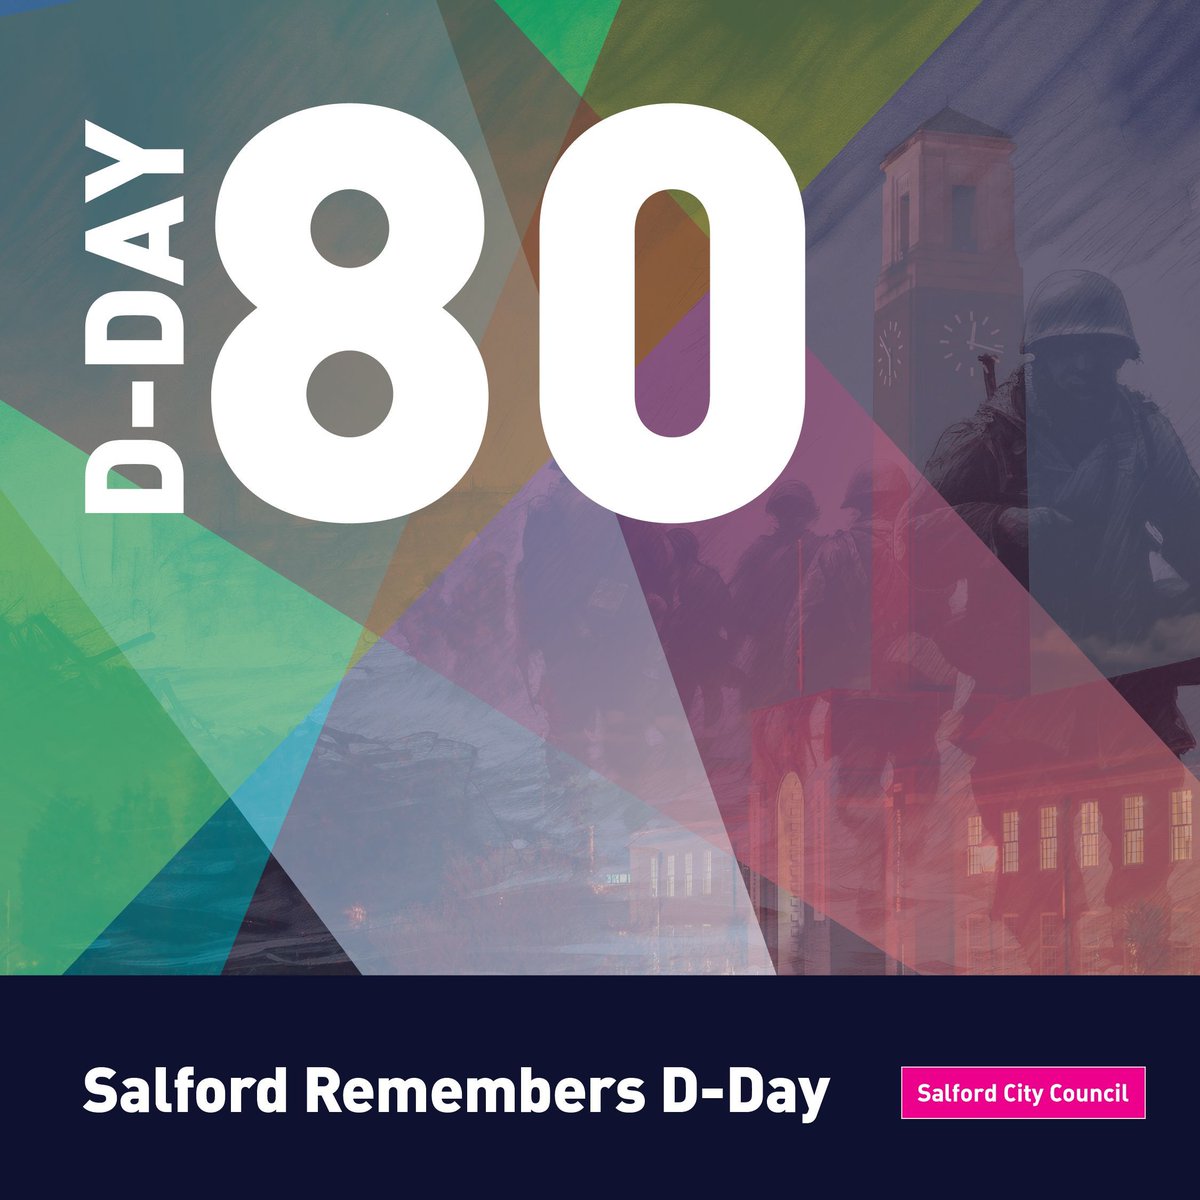 Join Salford’s special commemorative event to mark the 80th anniversary of the D-Day Landings. Come along to Salford Civic Centre on June 6, 2024 from 8.30pm for 🏛️ a special light projection show, sermons and tributes 🍔 range of food and drink stalls buff.ly/4bJWVfD